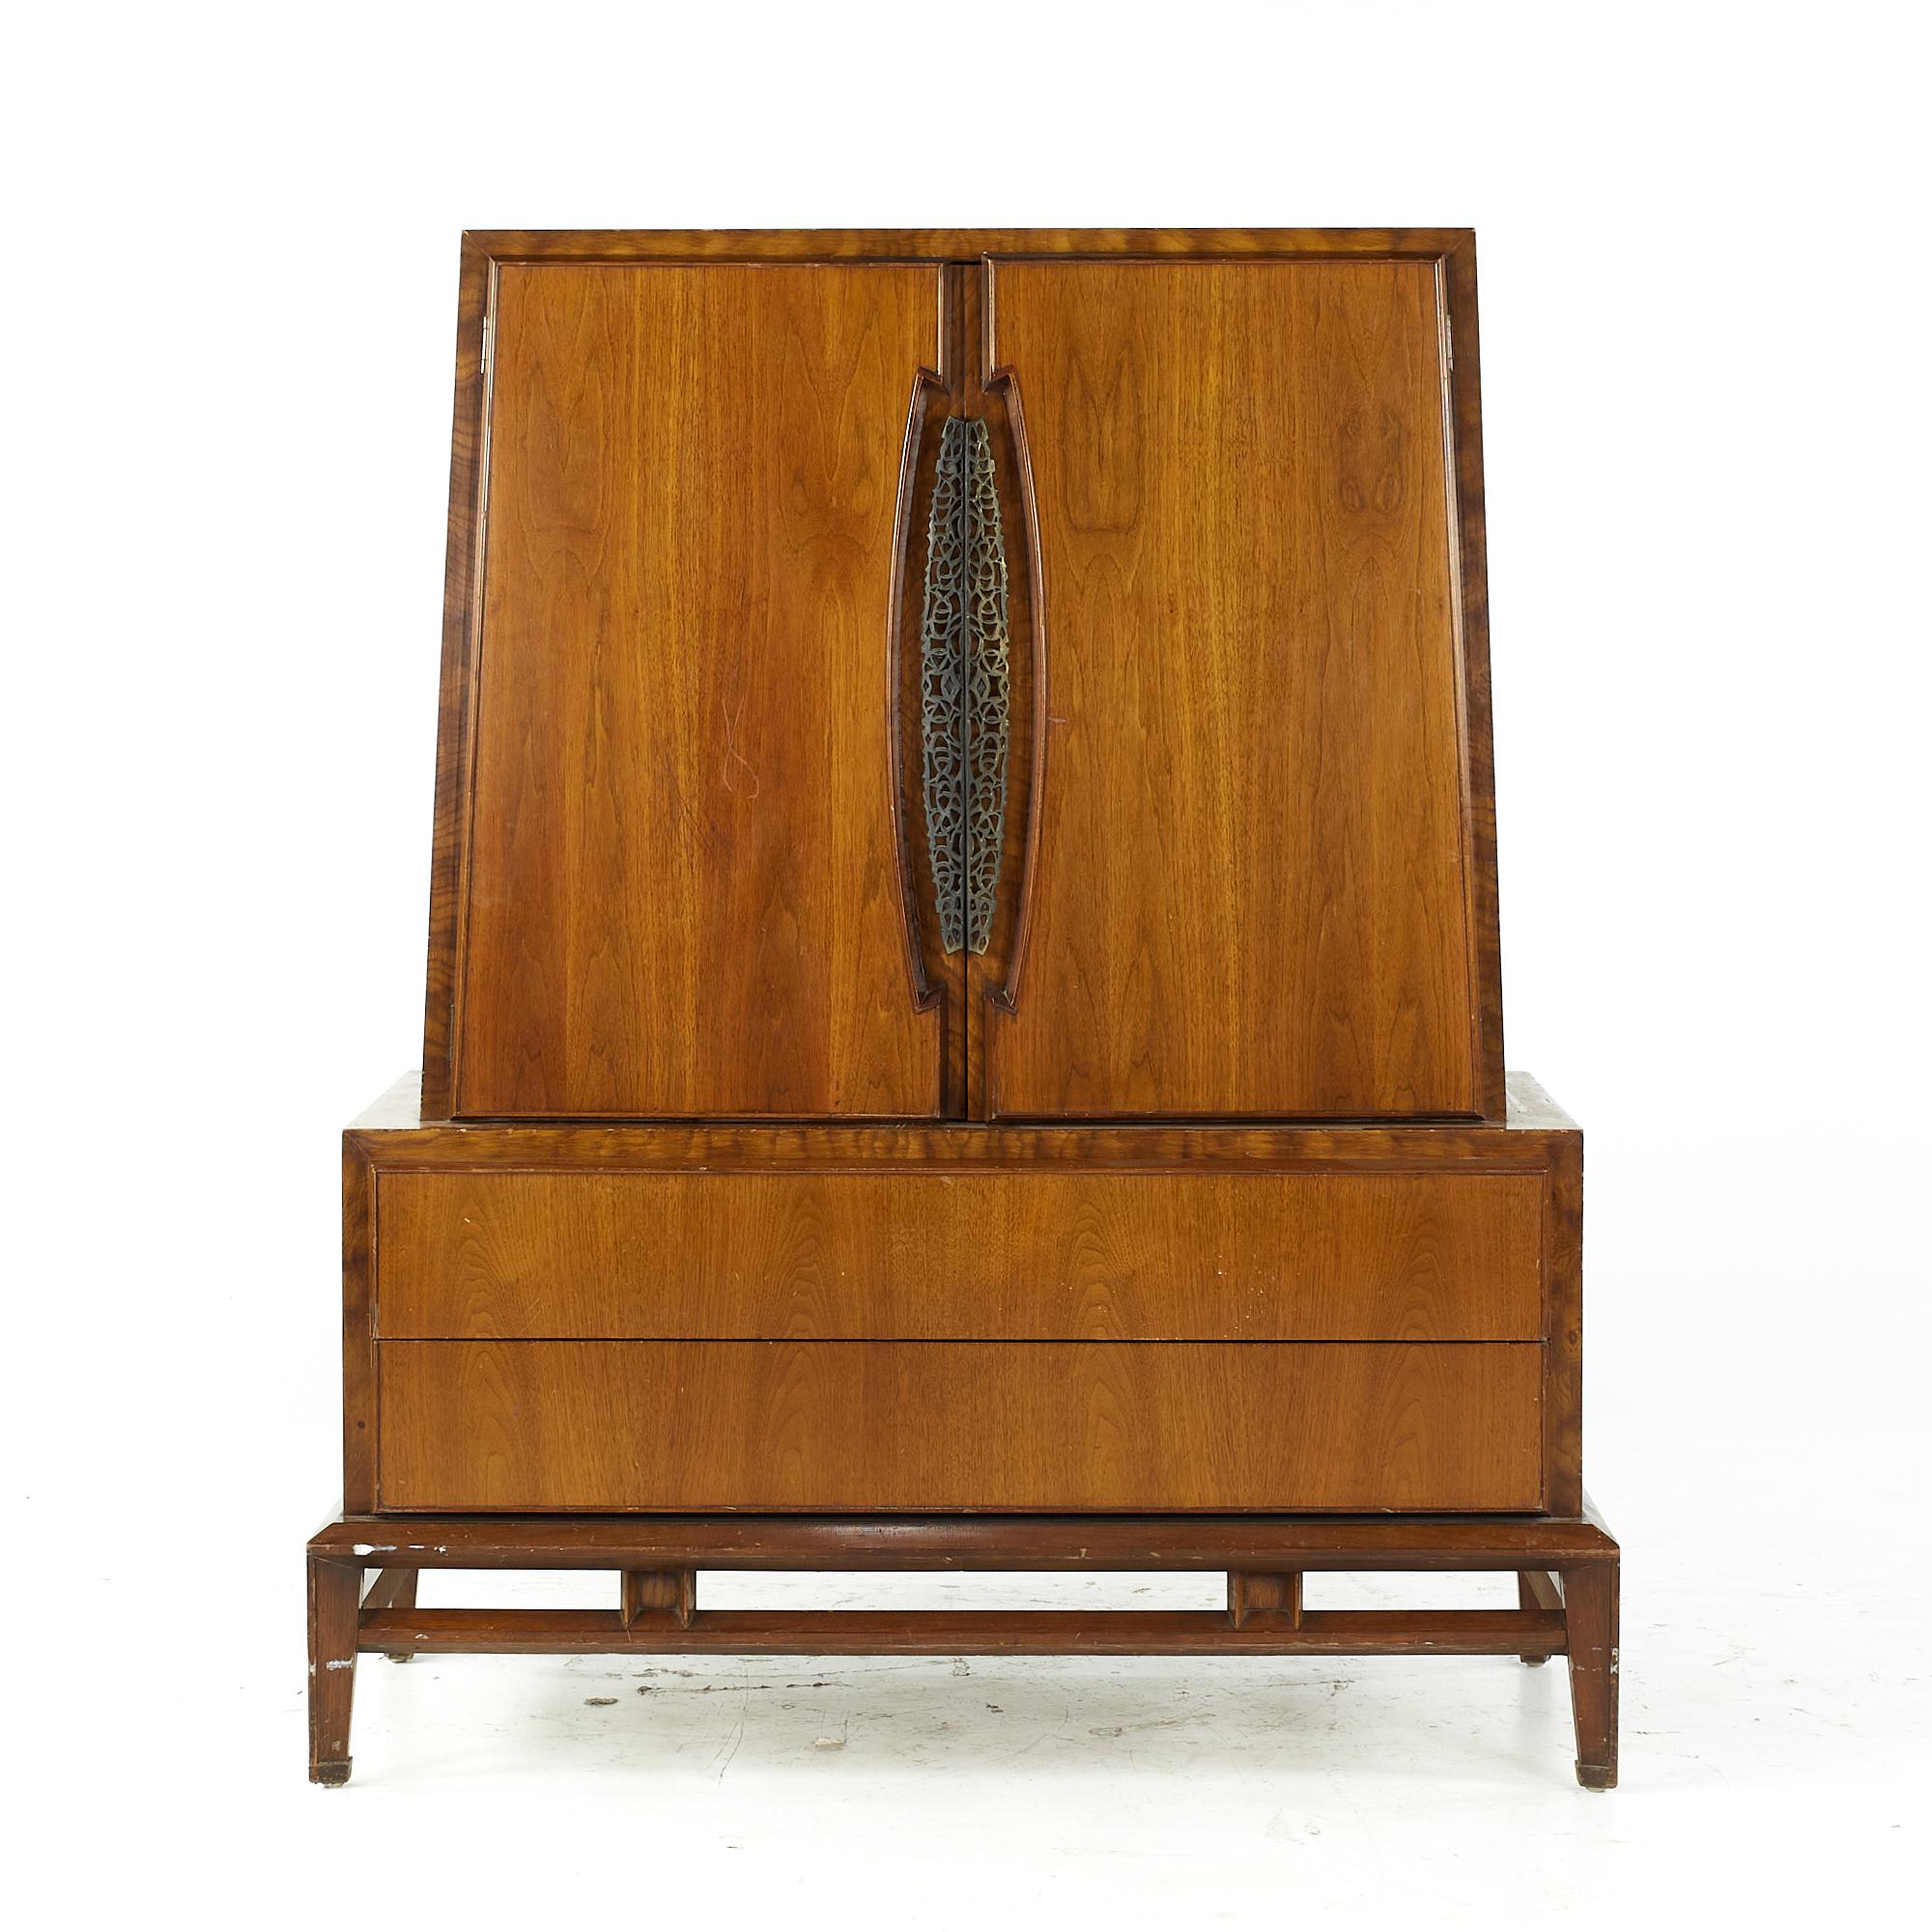 Helen Hobey Baker midcentury walnut Brutalist armoire

This armoire measures: 44 wide x 21.5 deep x 55 inches high

All pieces of furniture can be had in what we call restored vintage condition. That means the piece is restored upon purchase so